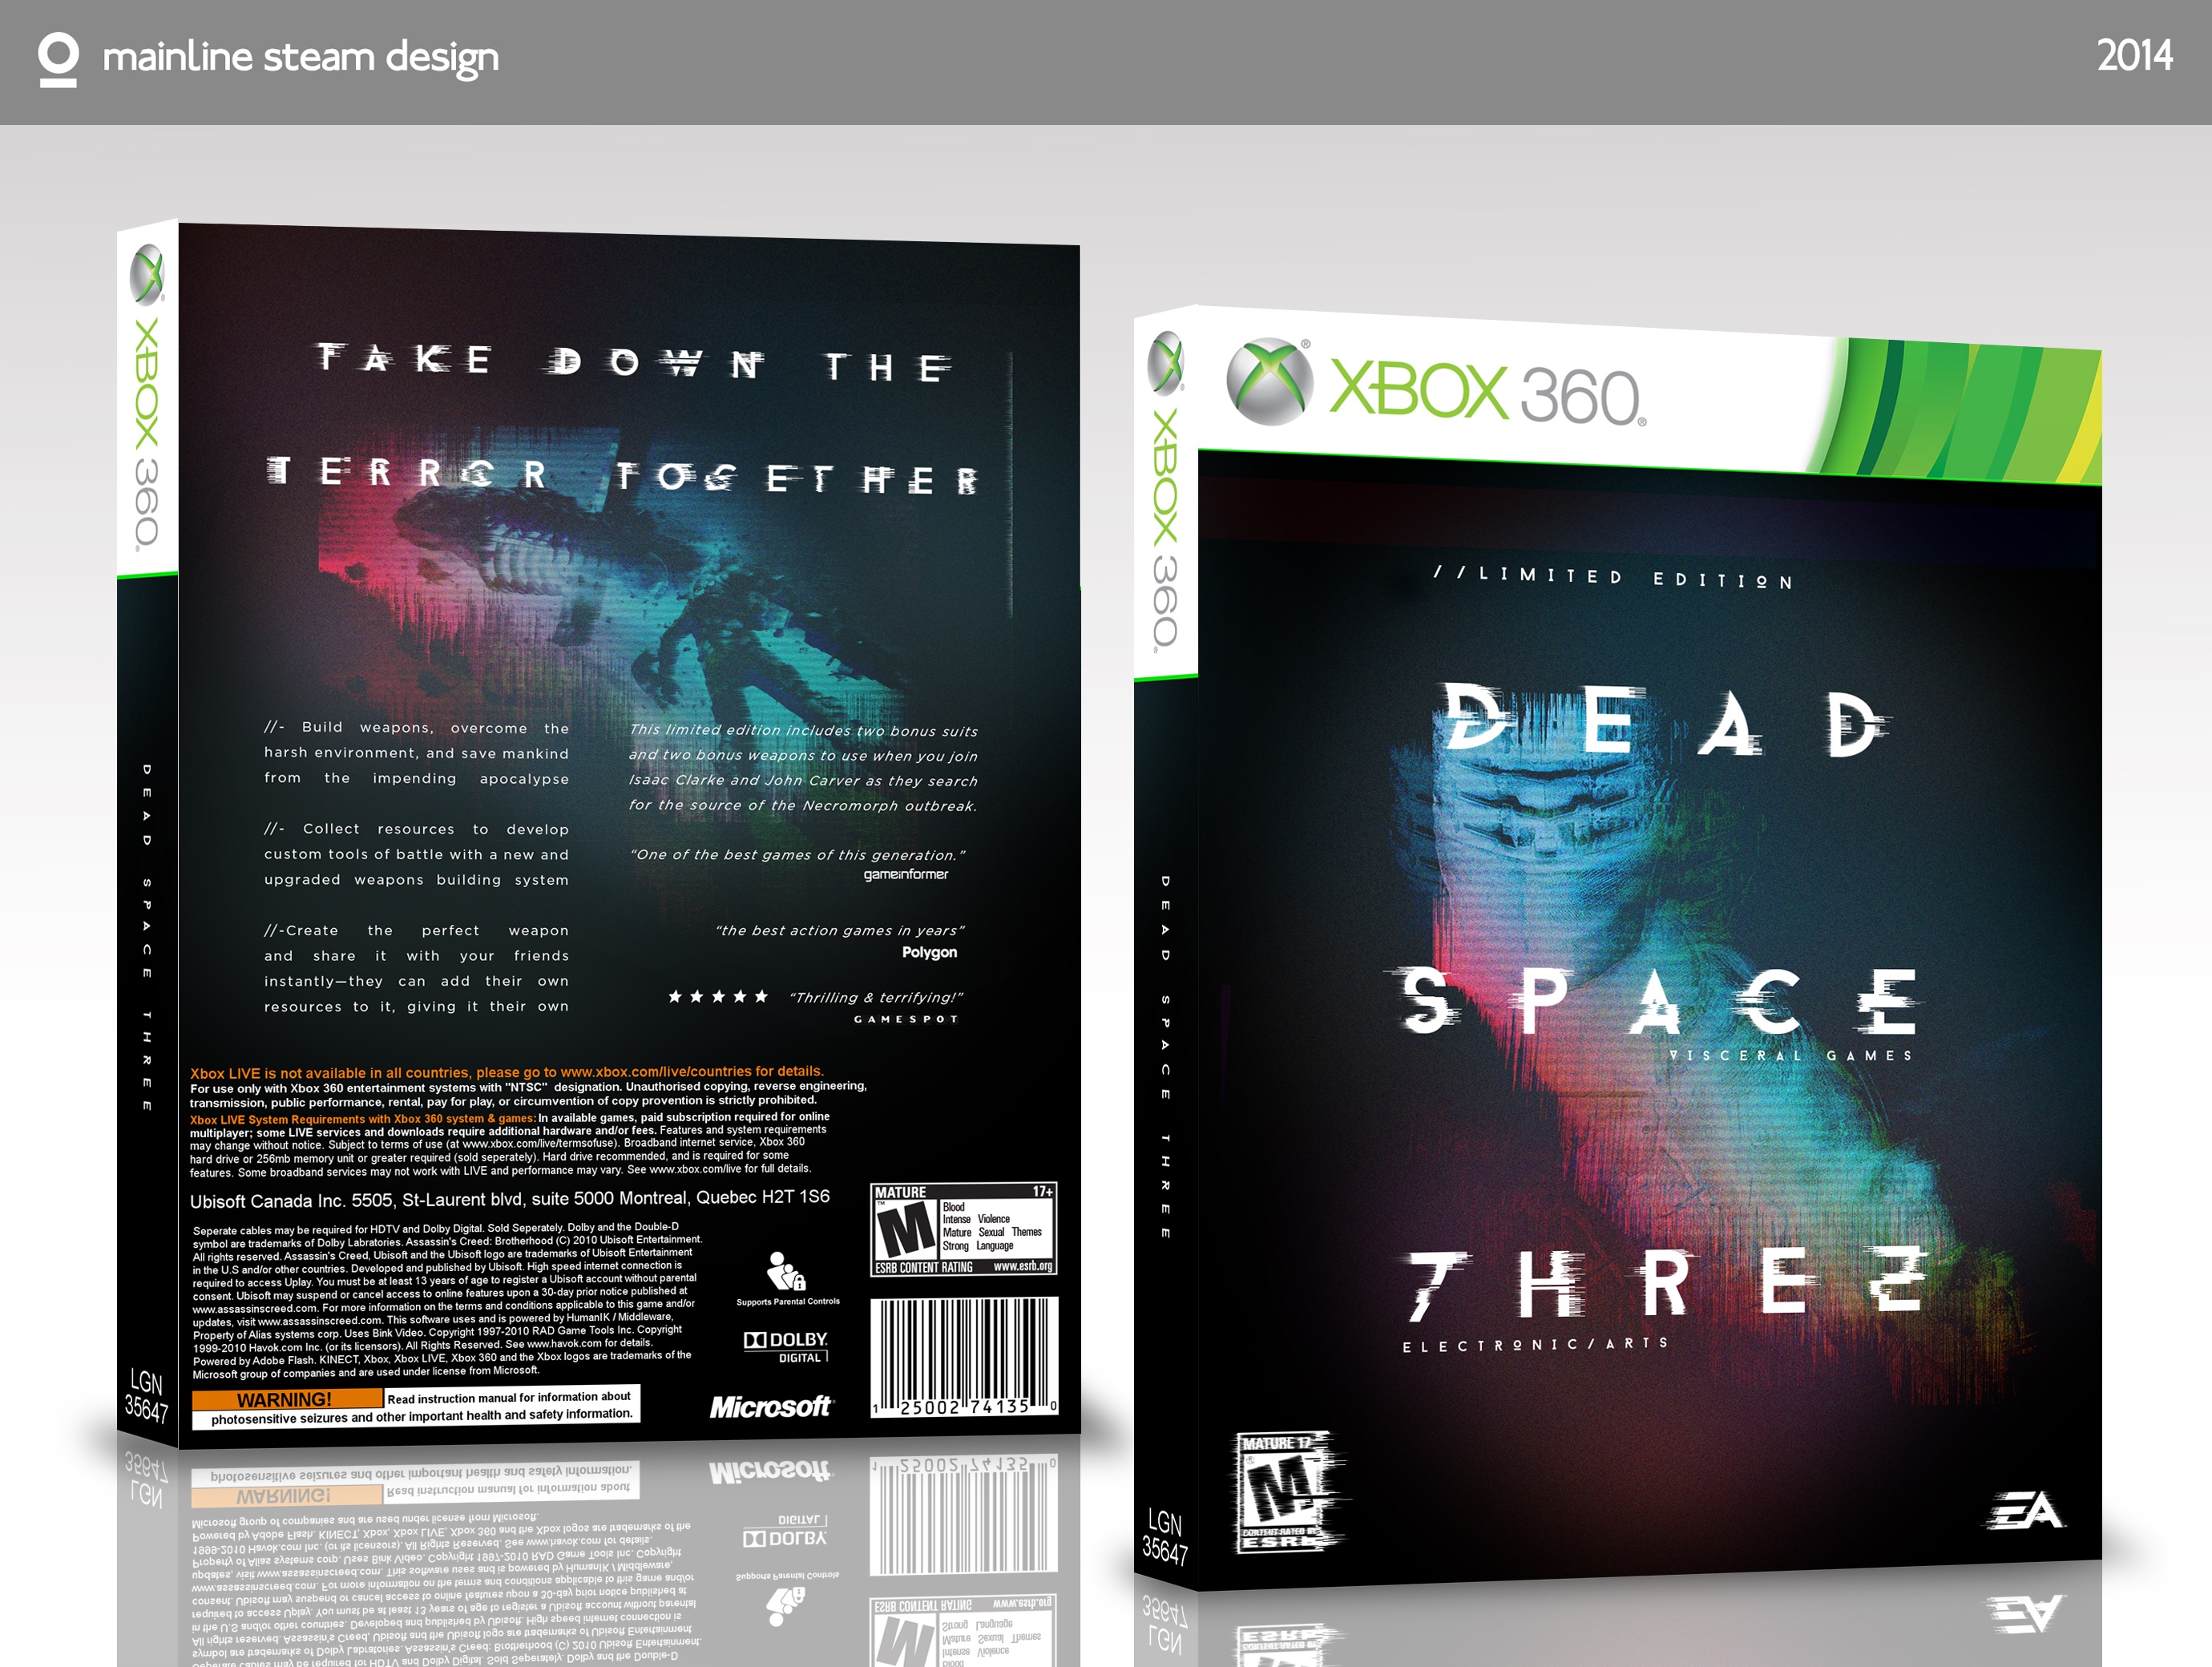 dead space 3 limited edition contiewnt quoi?